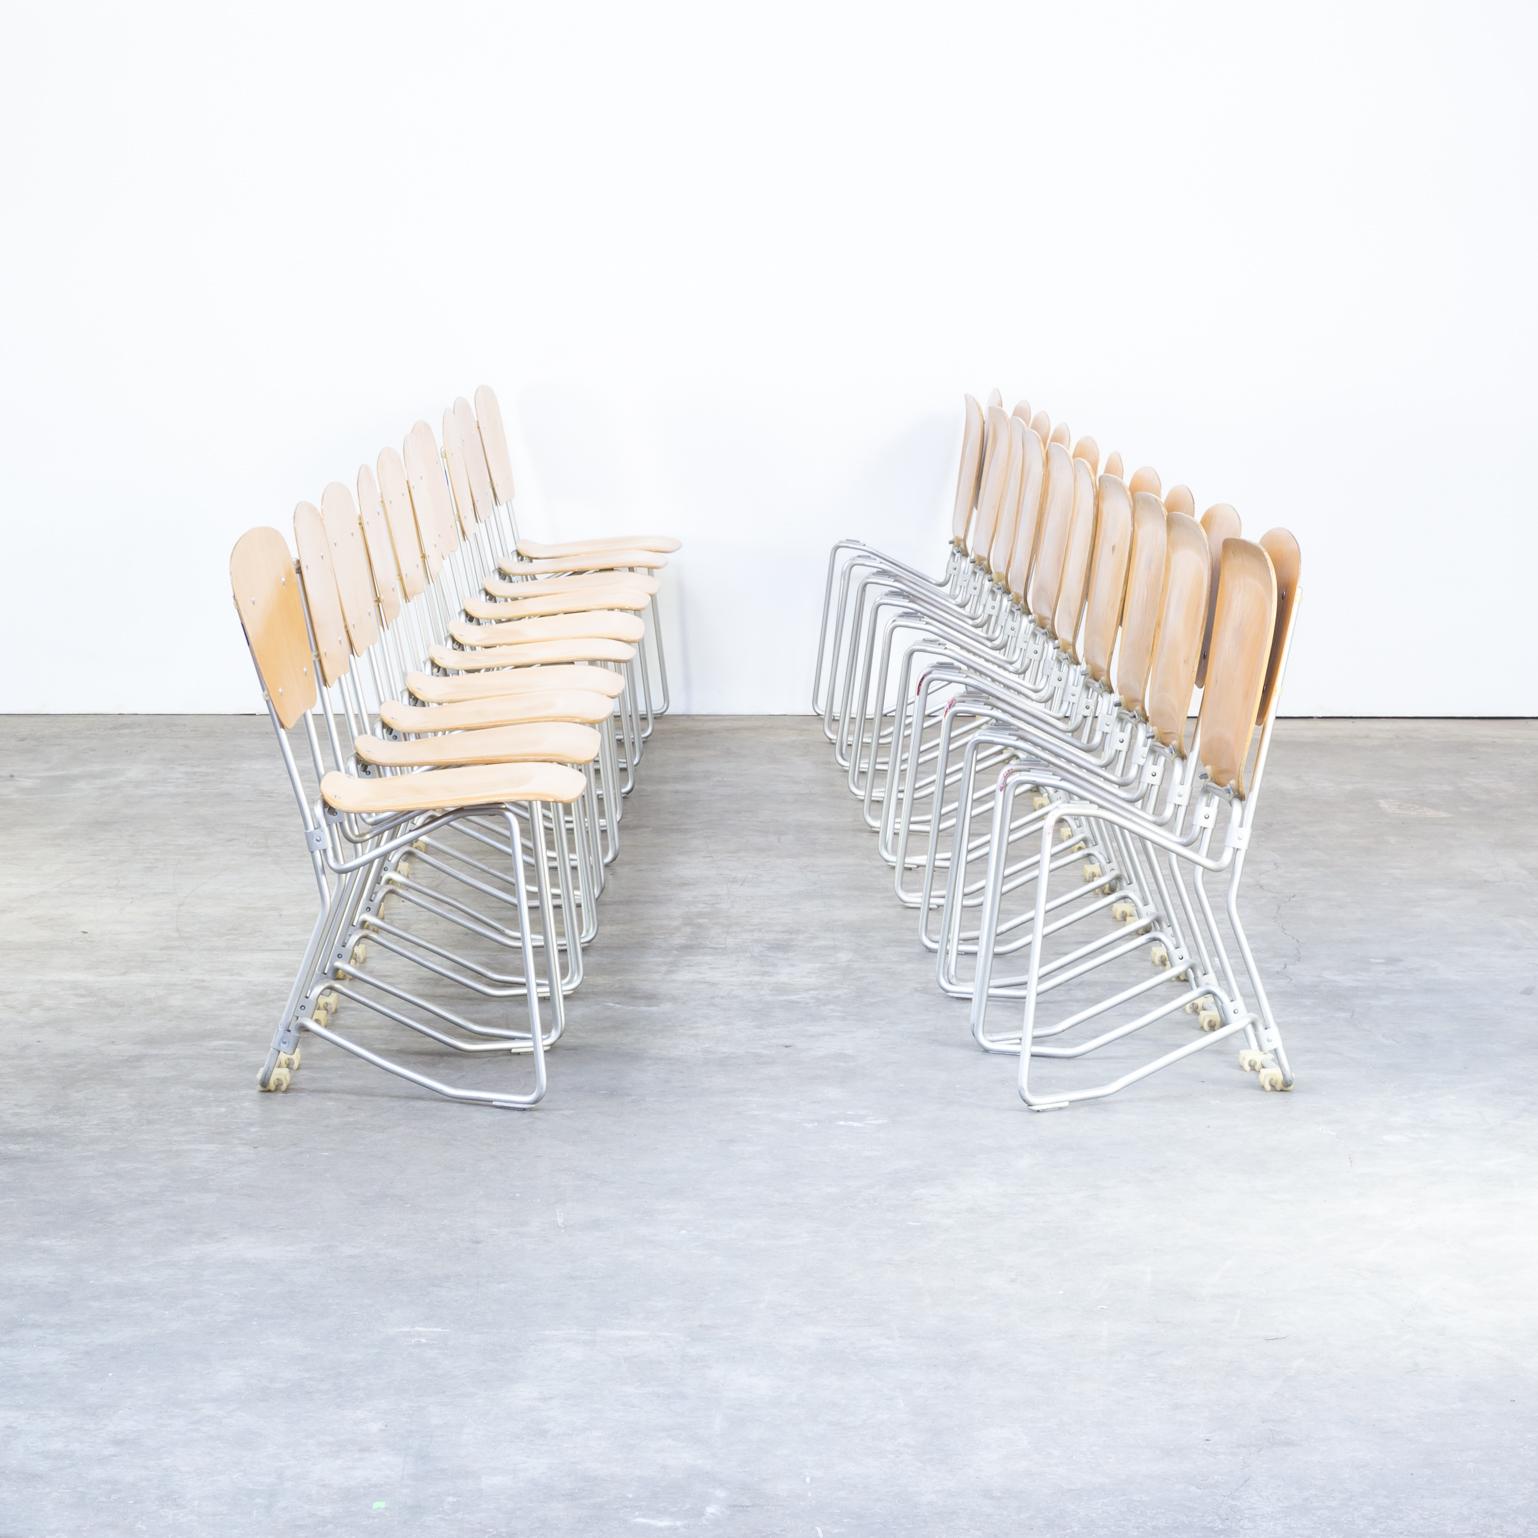 Swiss 1950s Armin Wirth ‘aluflex’ Folding Chair for Hans Zollinger Sohre Set of 20 For Sale